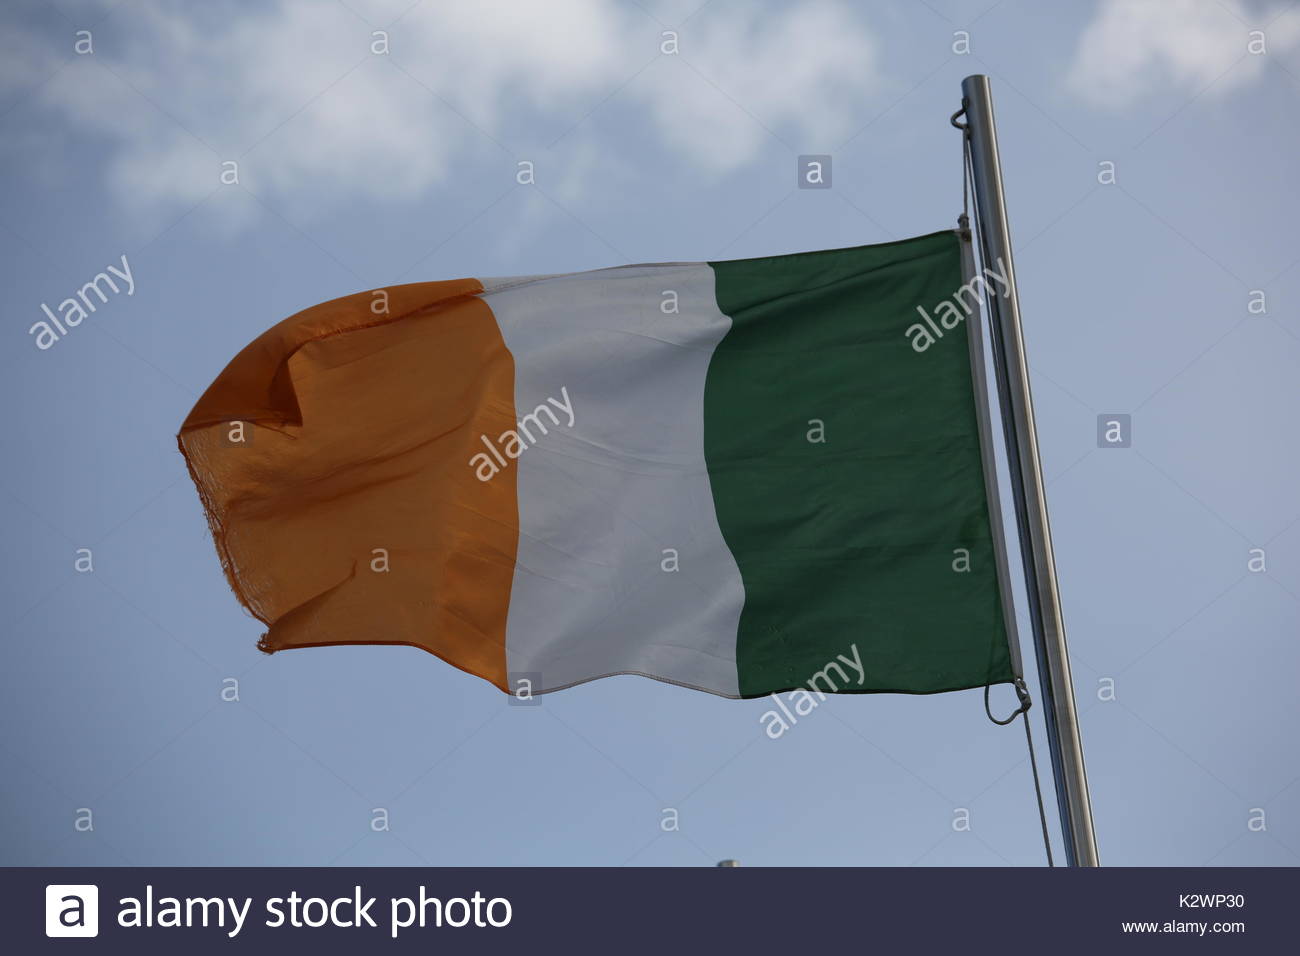 The Irish triclour, flag of the Republic of Ireland, blowing in the wind in Dublin on a summer's day. Stock Photo